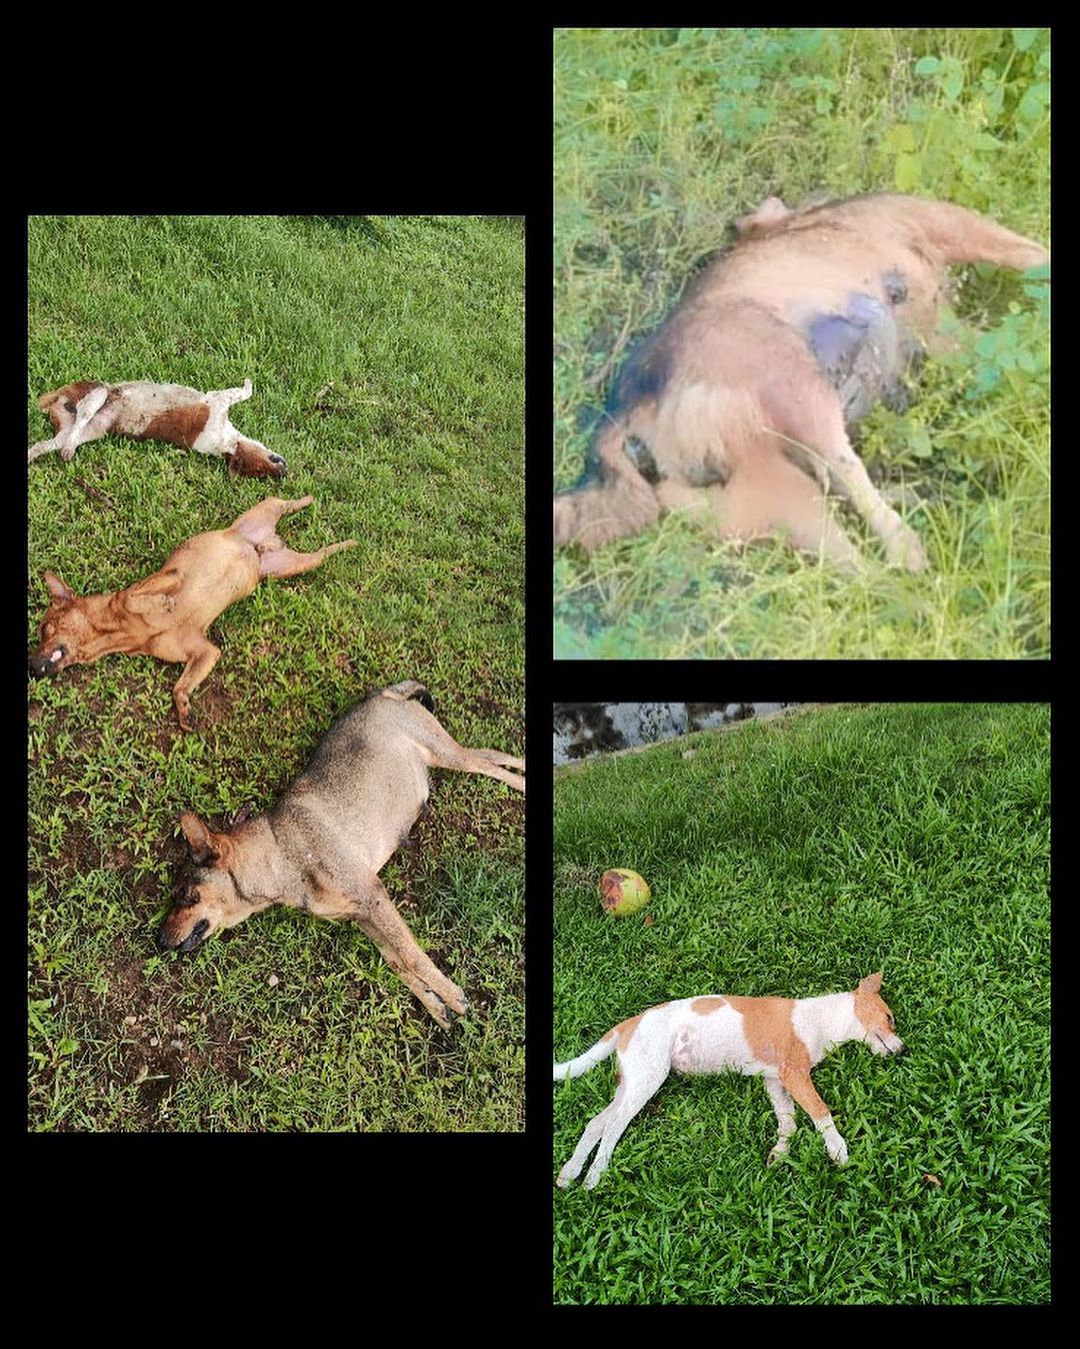 M’sian pest management company accused of killing stray dogs & disposing them in johor | weirdkaya